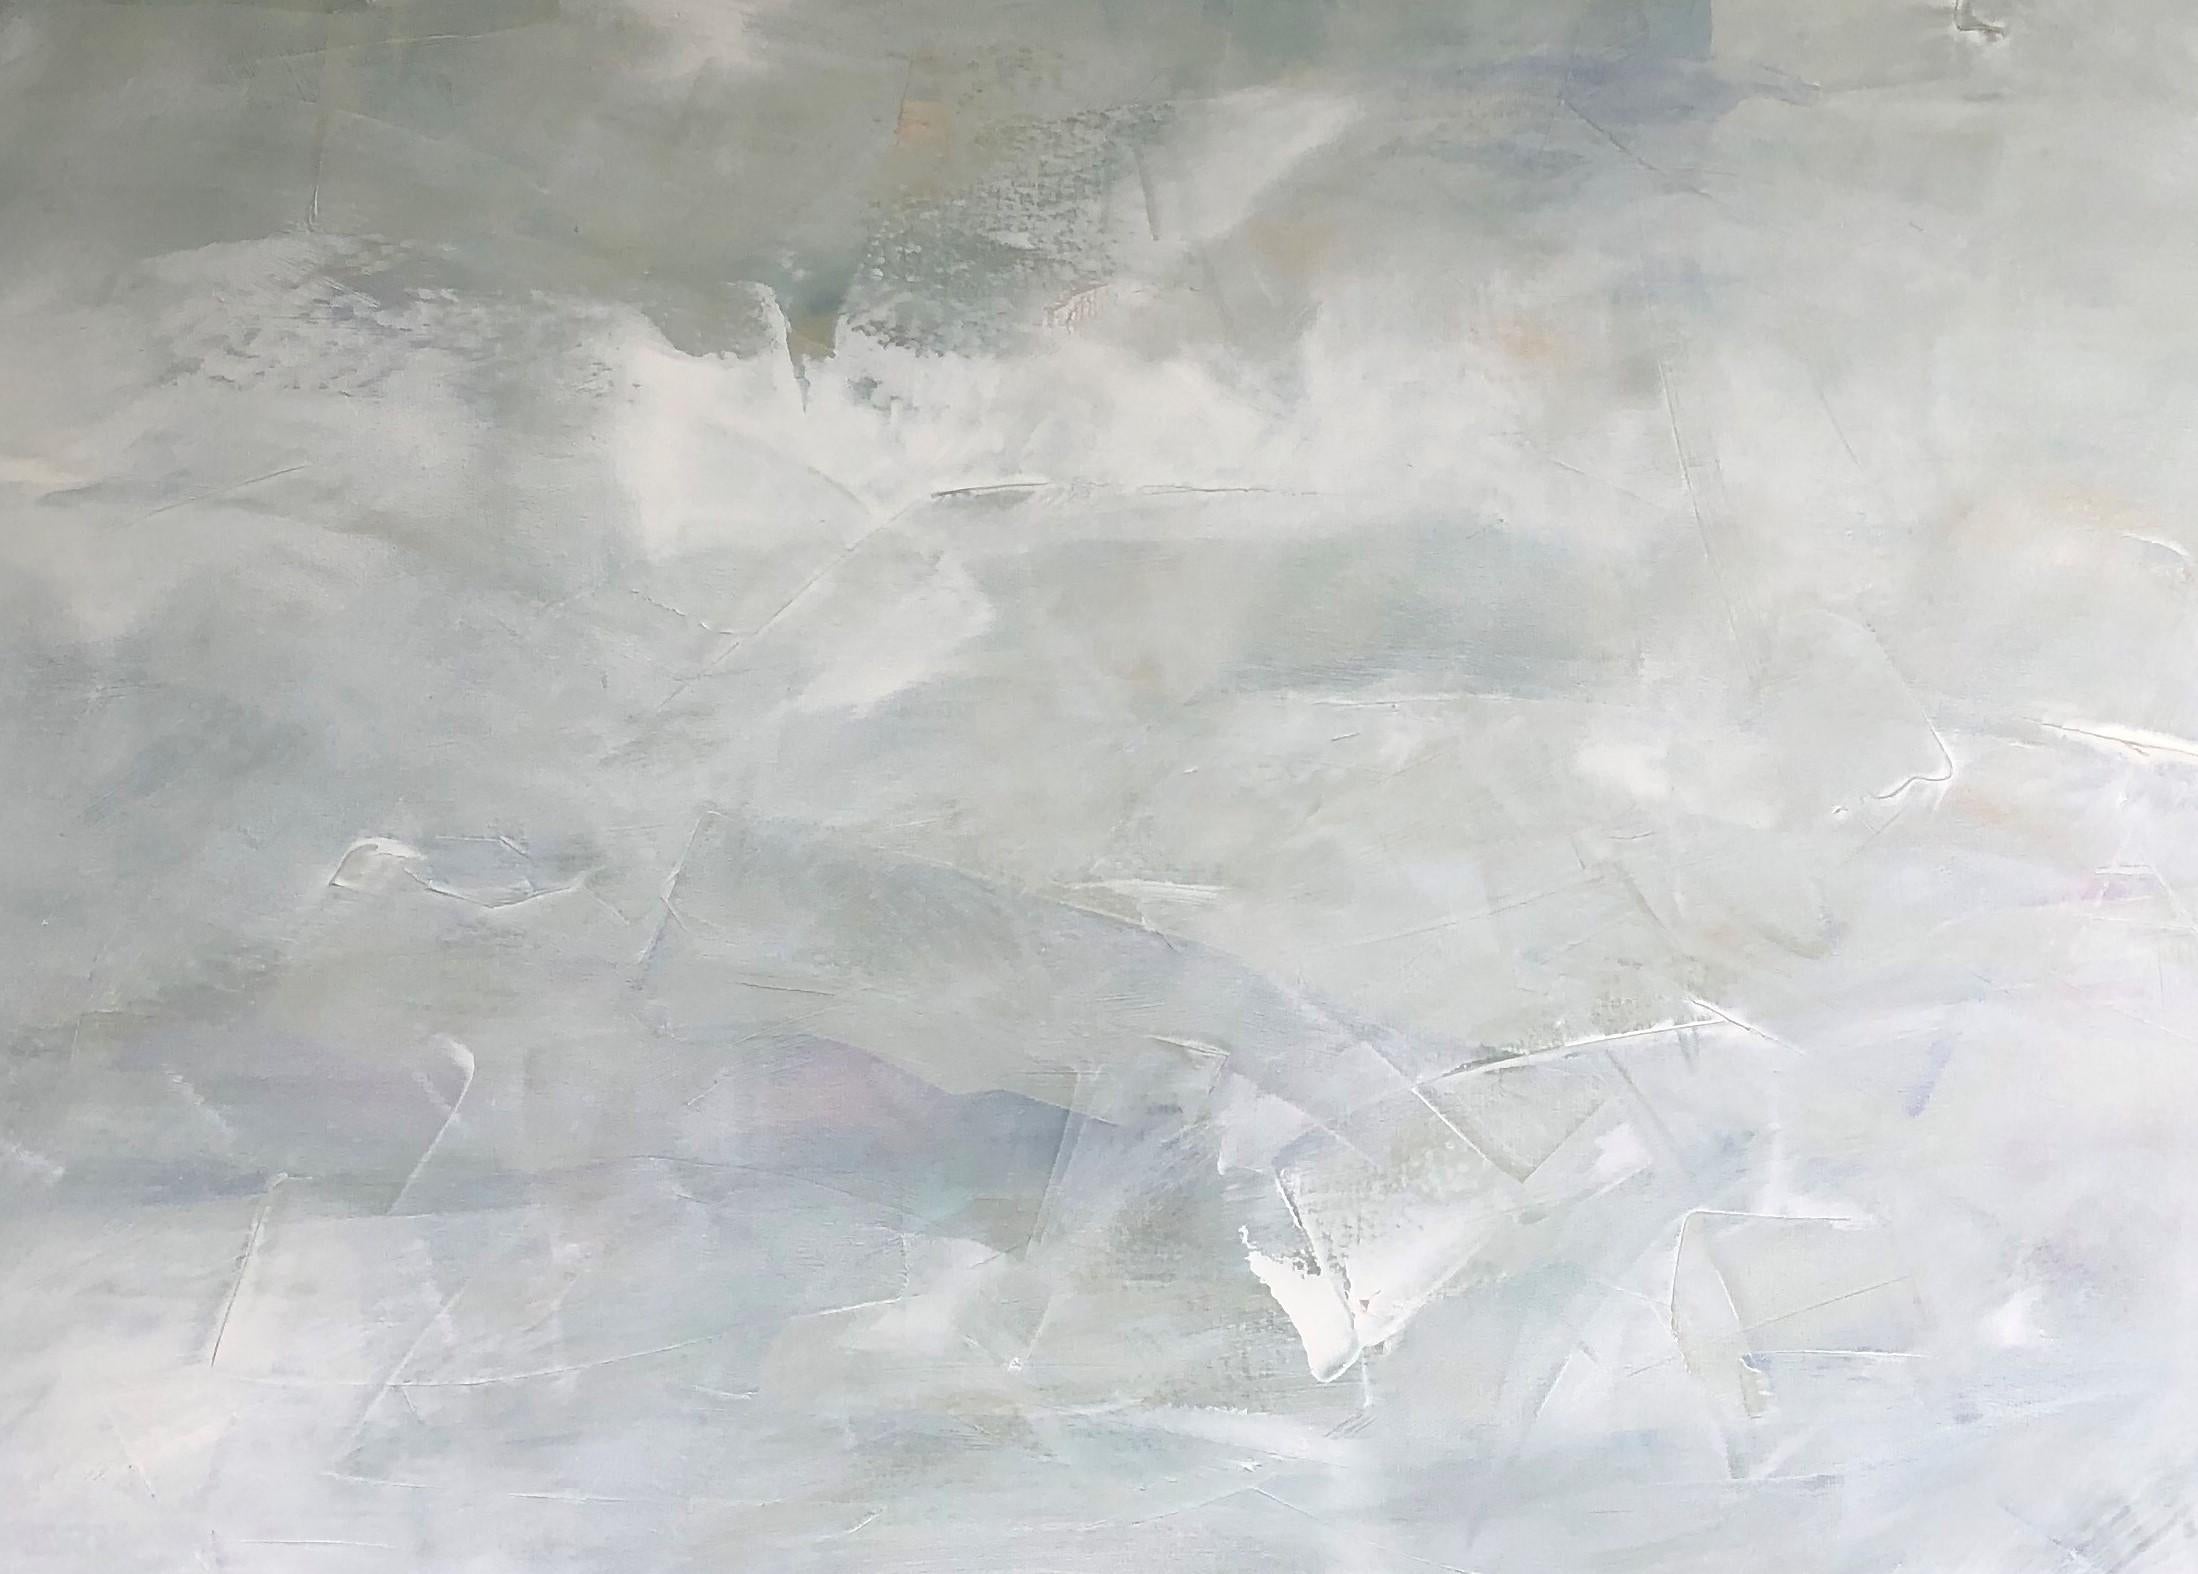 Dale Najarian, Hidden Sun, Oil on Canvas, 48x60.  An abstracted landscape and seascape.  It is filled with water and skies.  Strong blue and white and gray colors.

Dale Najarian received her BFA from Moore College of Art & Design in Philadelphia.